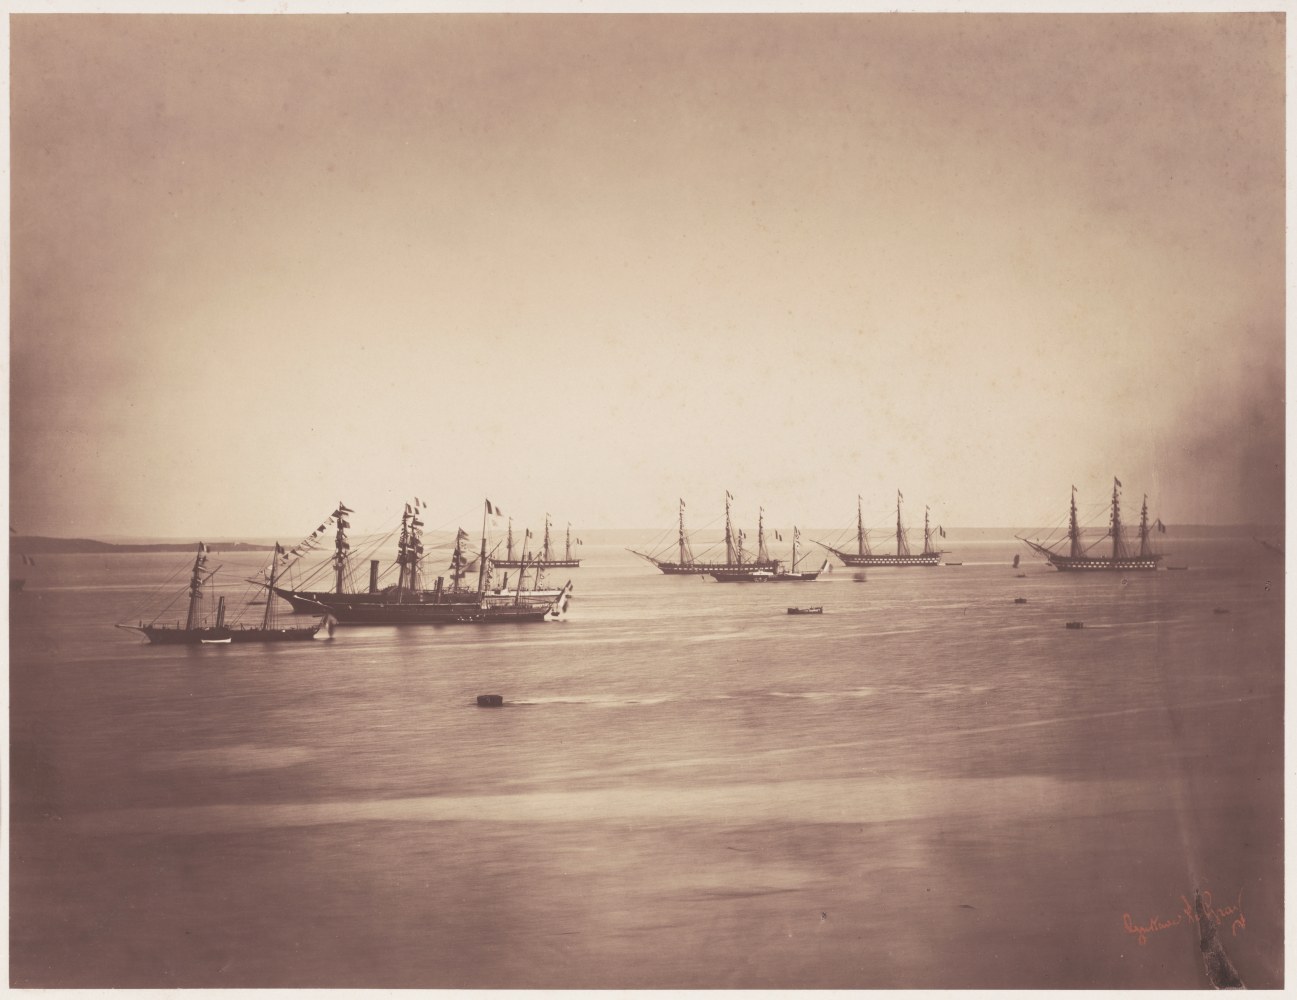 Gustave LE GRAY (French, 1820-1884) The French and English fleets, Cherbourg, 4-8 August 1858 Albumen print from a collodion negative 30.9 x 40.4 cm mounted on 52.5 x 70.7 cm paper Photographer's red signature stamp. &quot;21,721&quot; and &quot;Nº 38.&quot; in ink with photographer's oval blindstamp &quot;PHOTOGRAPHIE / GUSTAVE LE GRAY &amp; Cº / PARIS&quot; on mount.